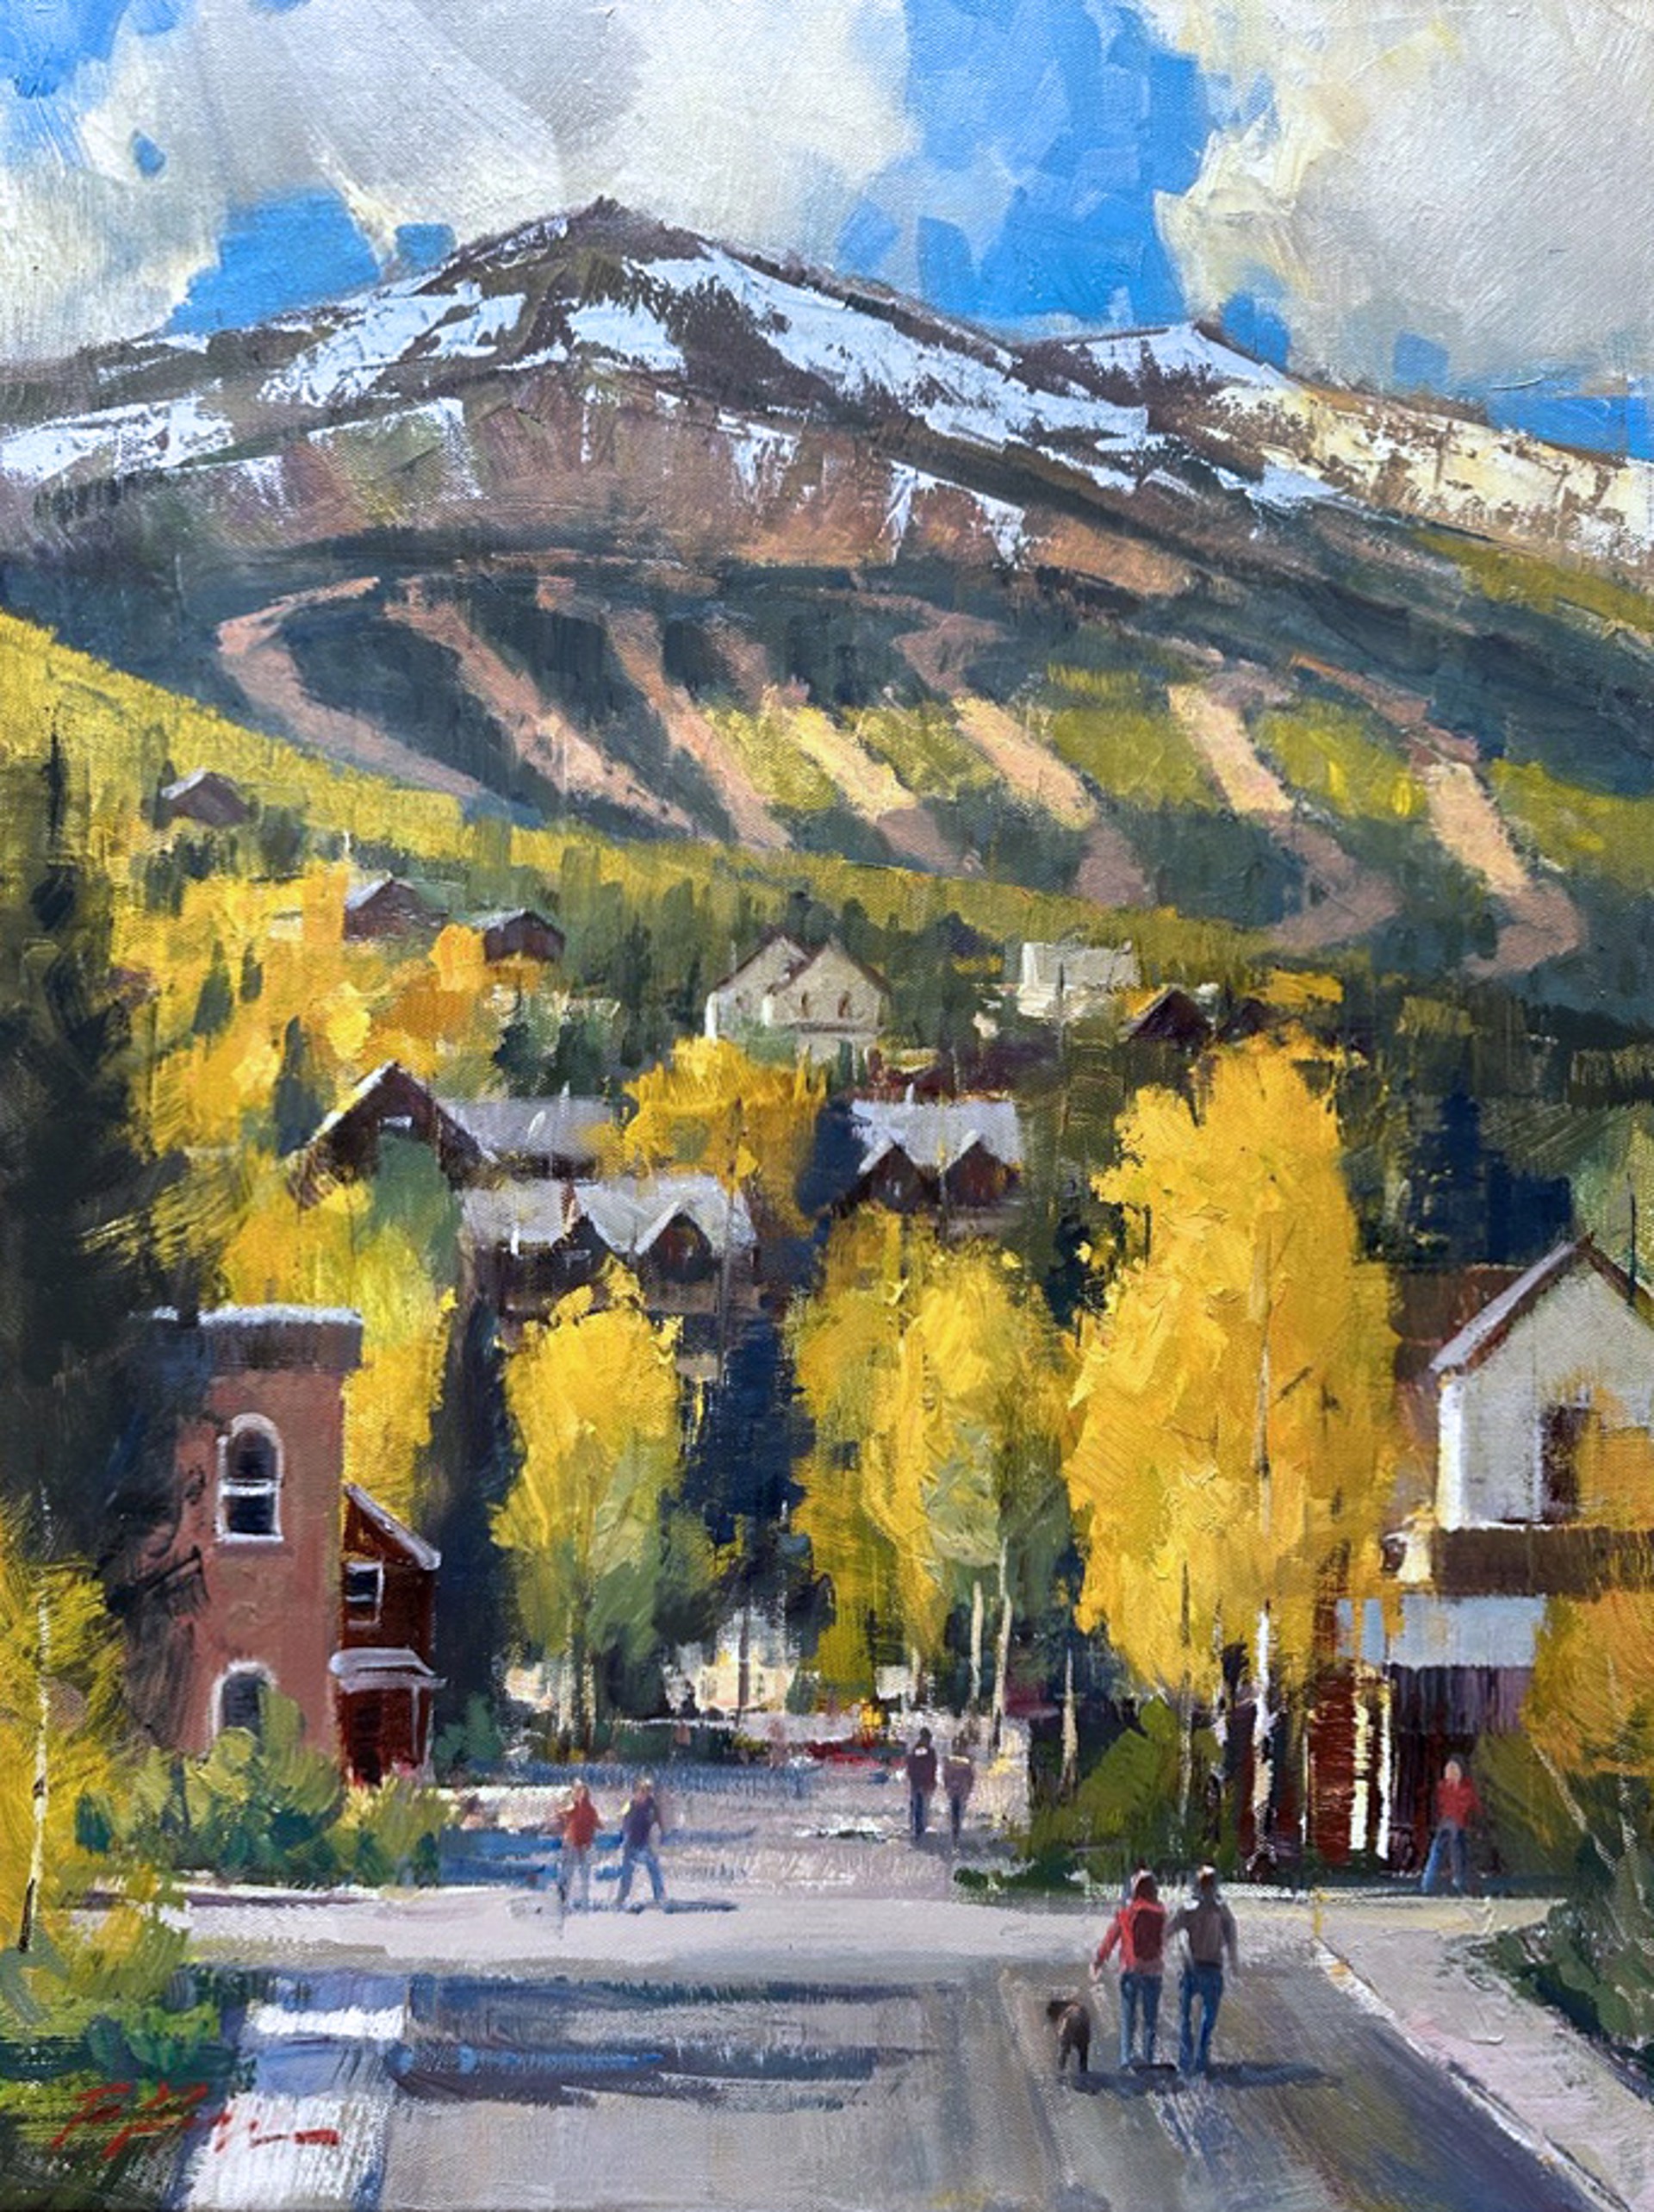 Autumn Afternoon in Breckenridge by Perry Brown